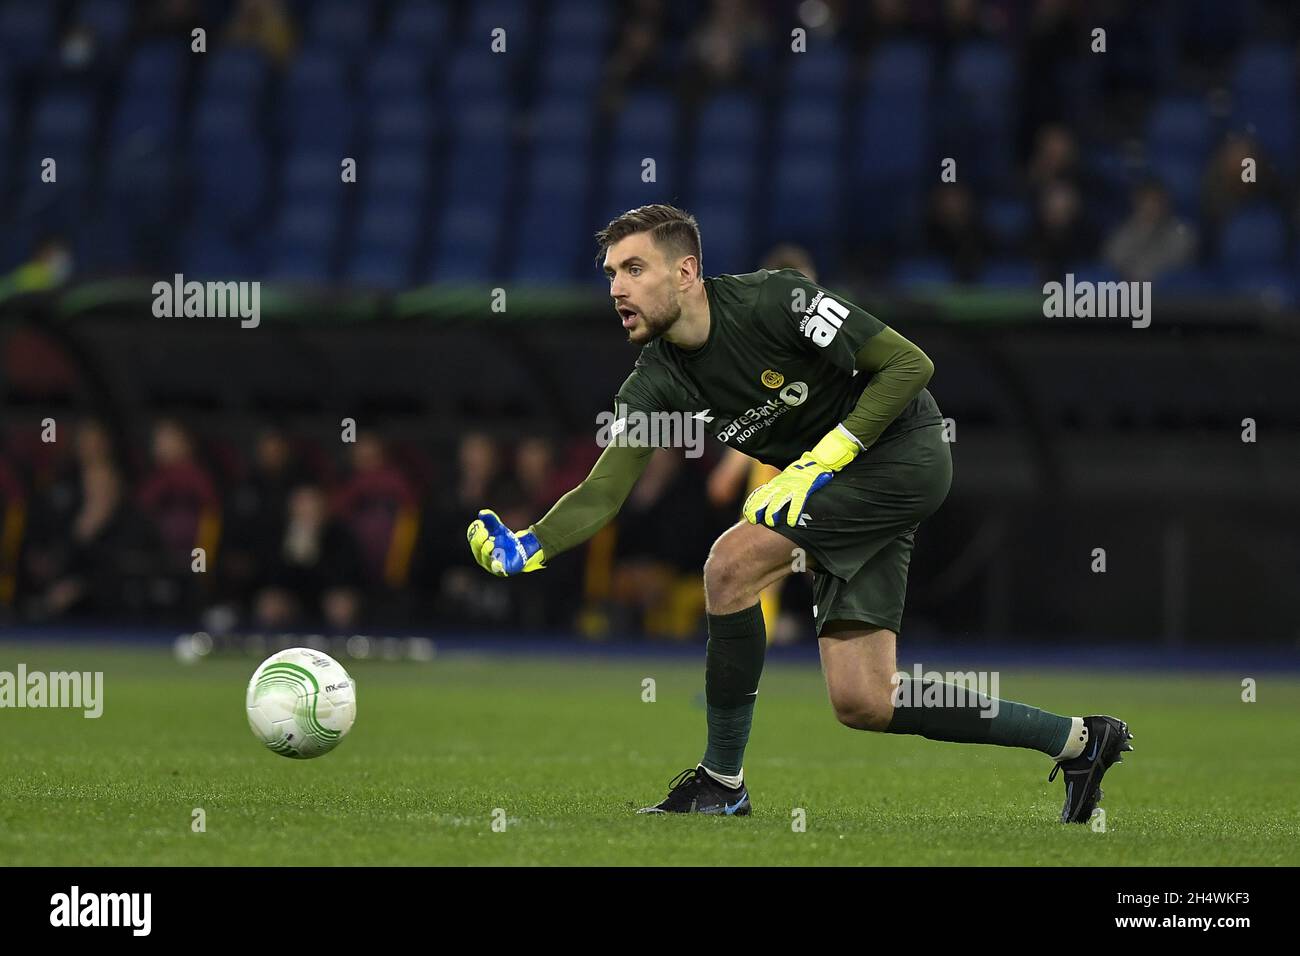 Rome, Italy. 04th Nov, 2021. Nikita Haikin of FK Bodo/Glimt in action  during the UEFA Europa Conference League group C match between A.S. Roma FK  Bodo/Glimt at Stadio Olimpico on November 4,